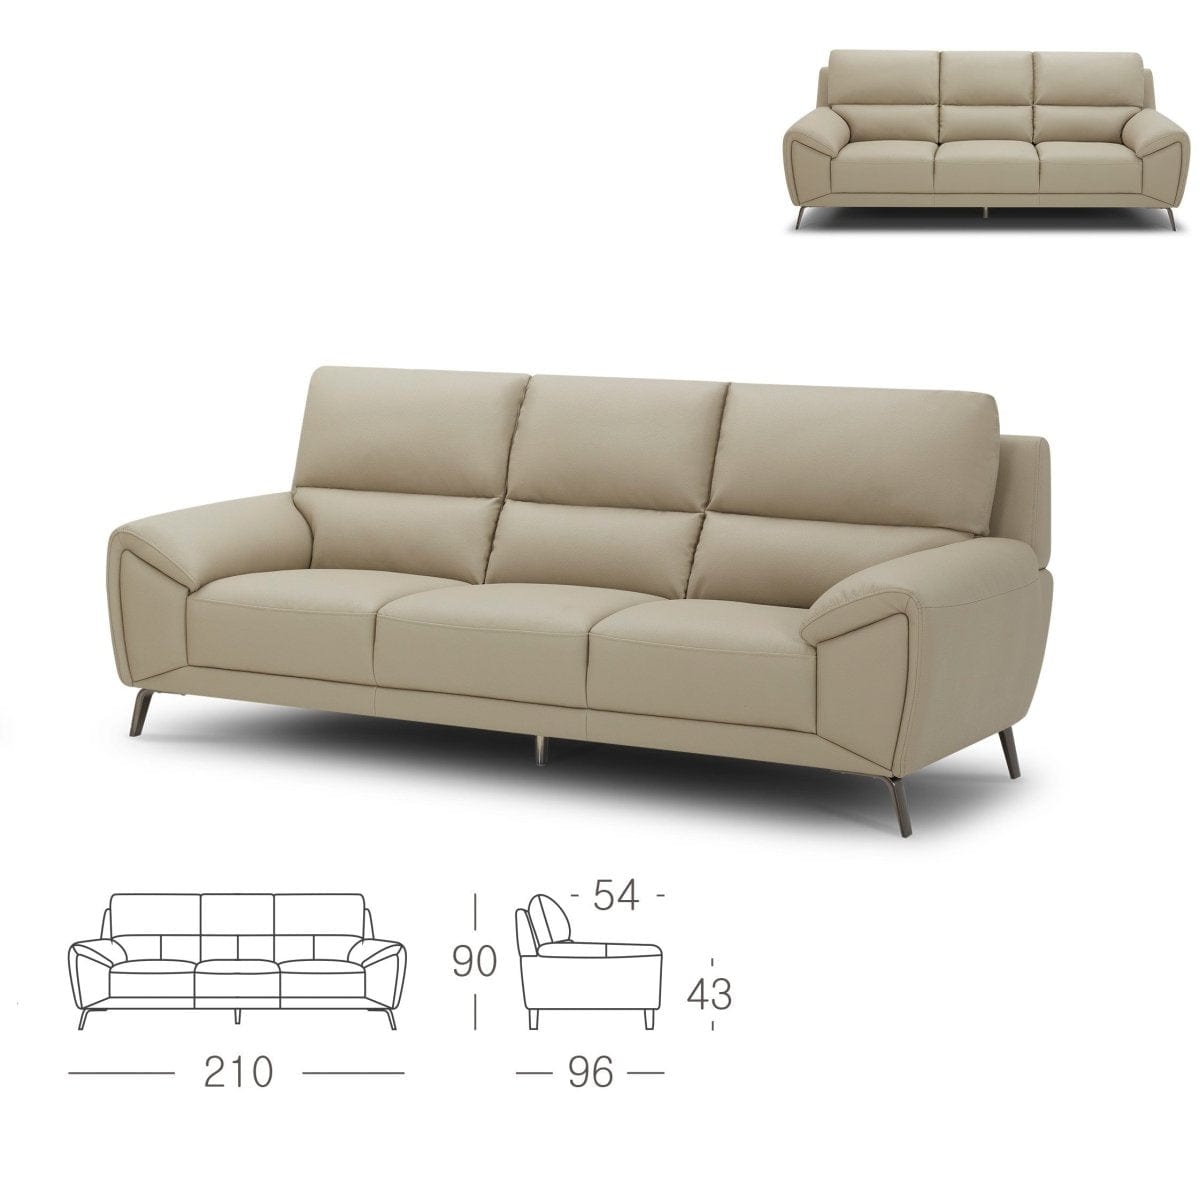 #1  KUKA #KF.086 Top-Grain Leather 3 Seater Sofa Col: M5652/SP picket and rail